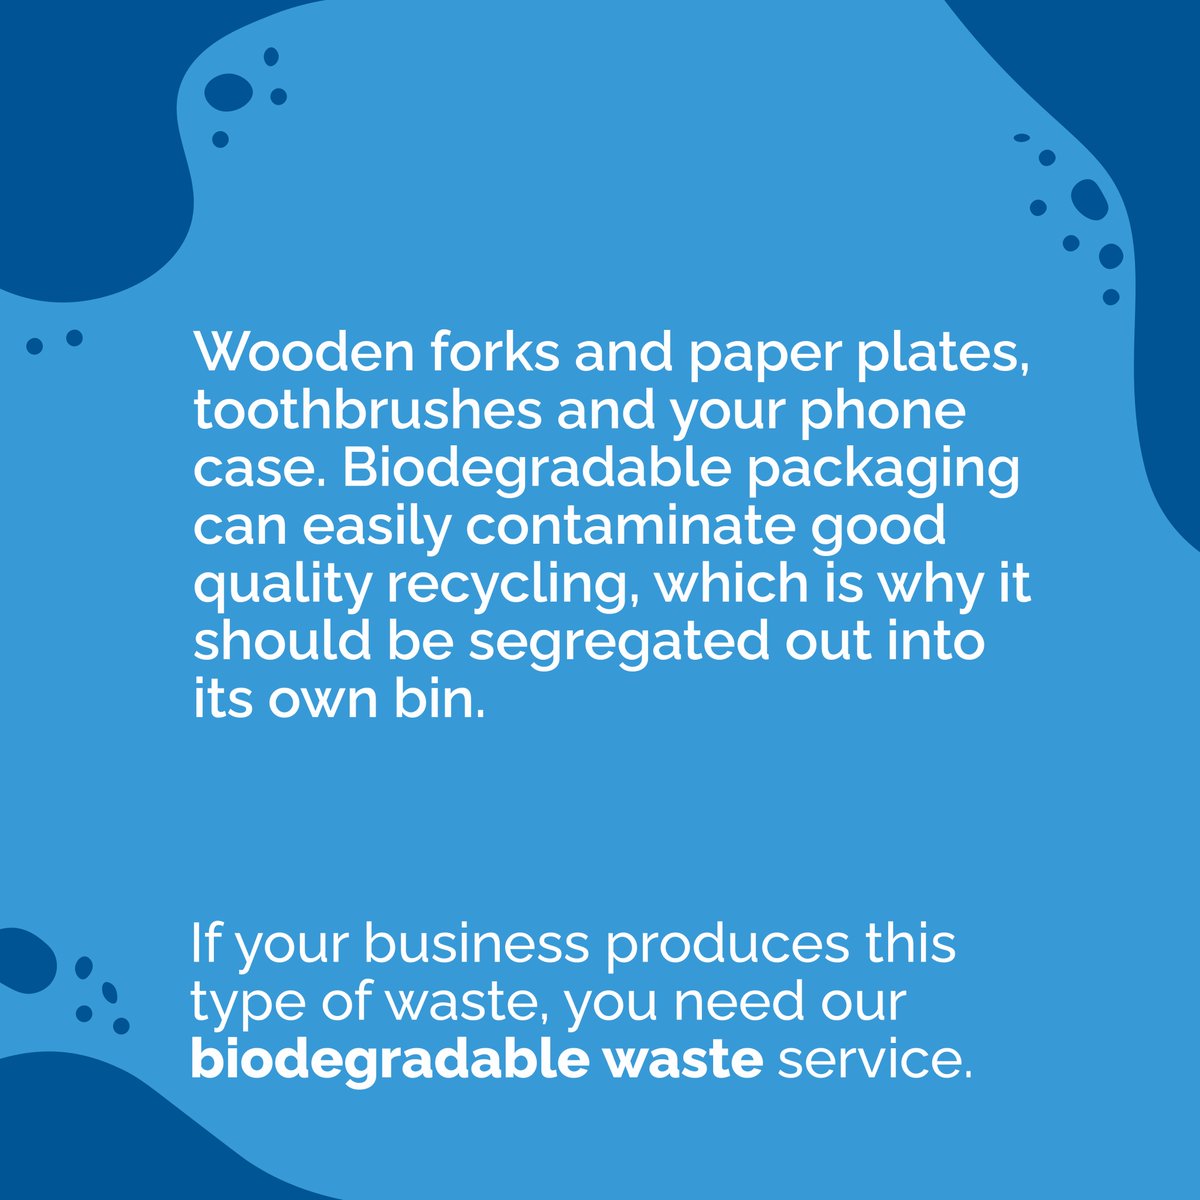 Businesses, beware! ⚠️ Biodegradable and compostable packaging often end up in the mixed recycling bin, damaging recycling efforts. Don't let good materials get contaminated. (2/26)